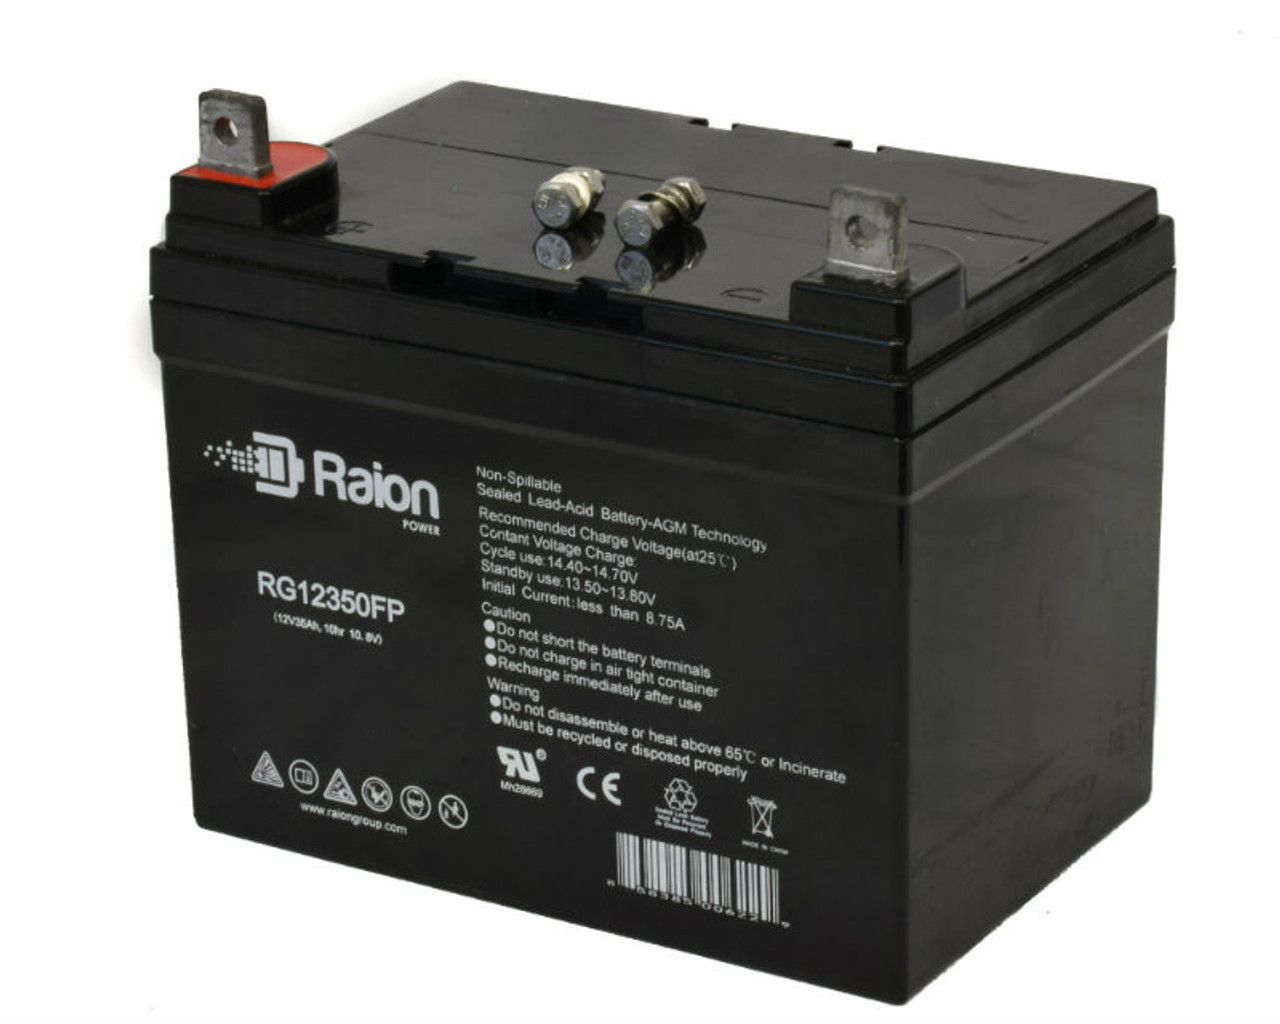 Raion Power Replacement 12V 35Ah RG12350FP Mobility Scooter Battery for Everest & Jennings Wheelchairs Sprint